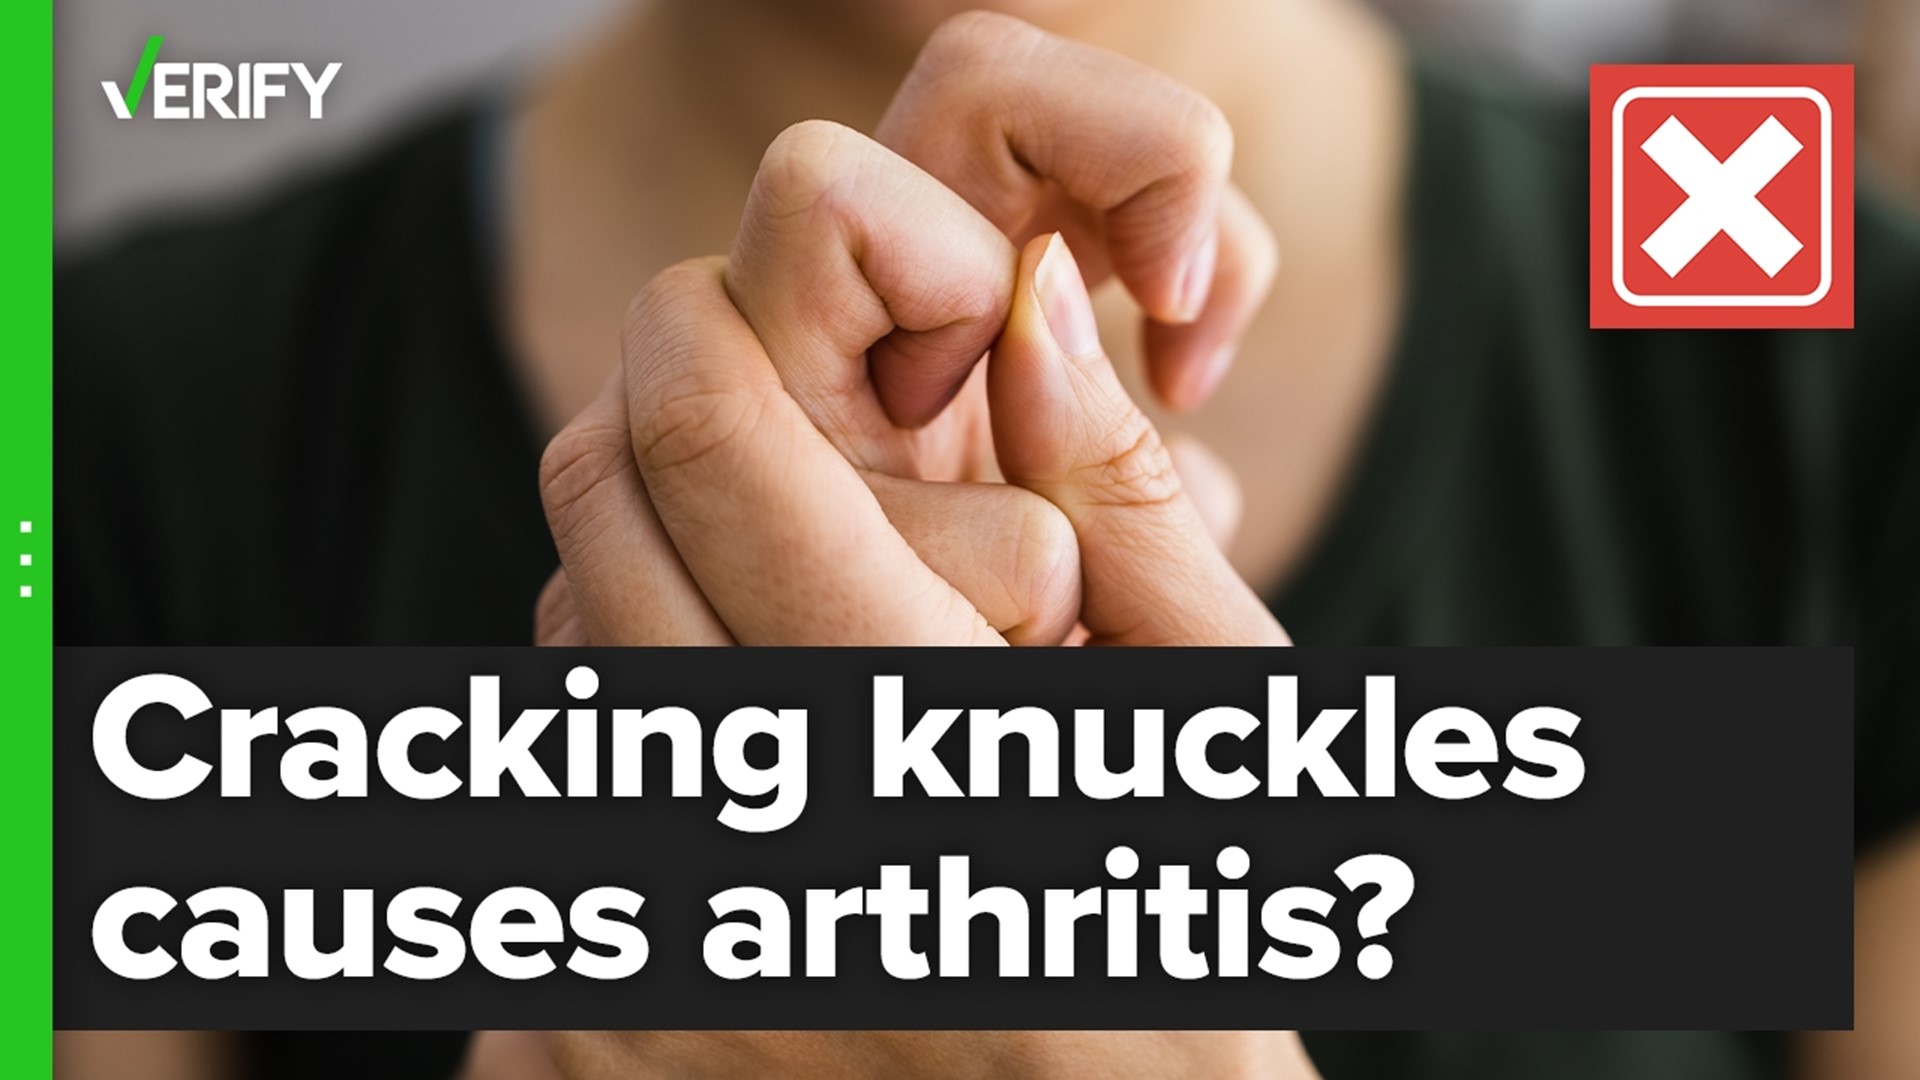 Popping your knuckles, if done correctly, has few if any long-term bad health effects, according to decades of studies. This includes osteoarthritis.